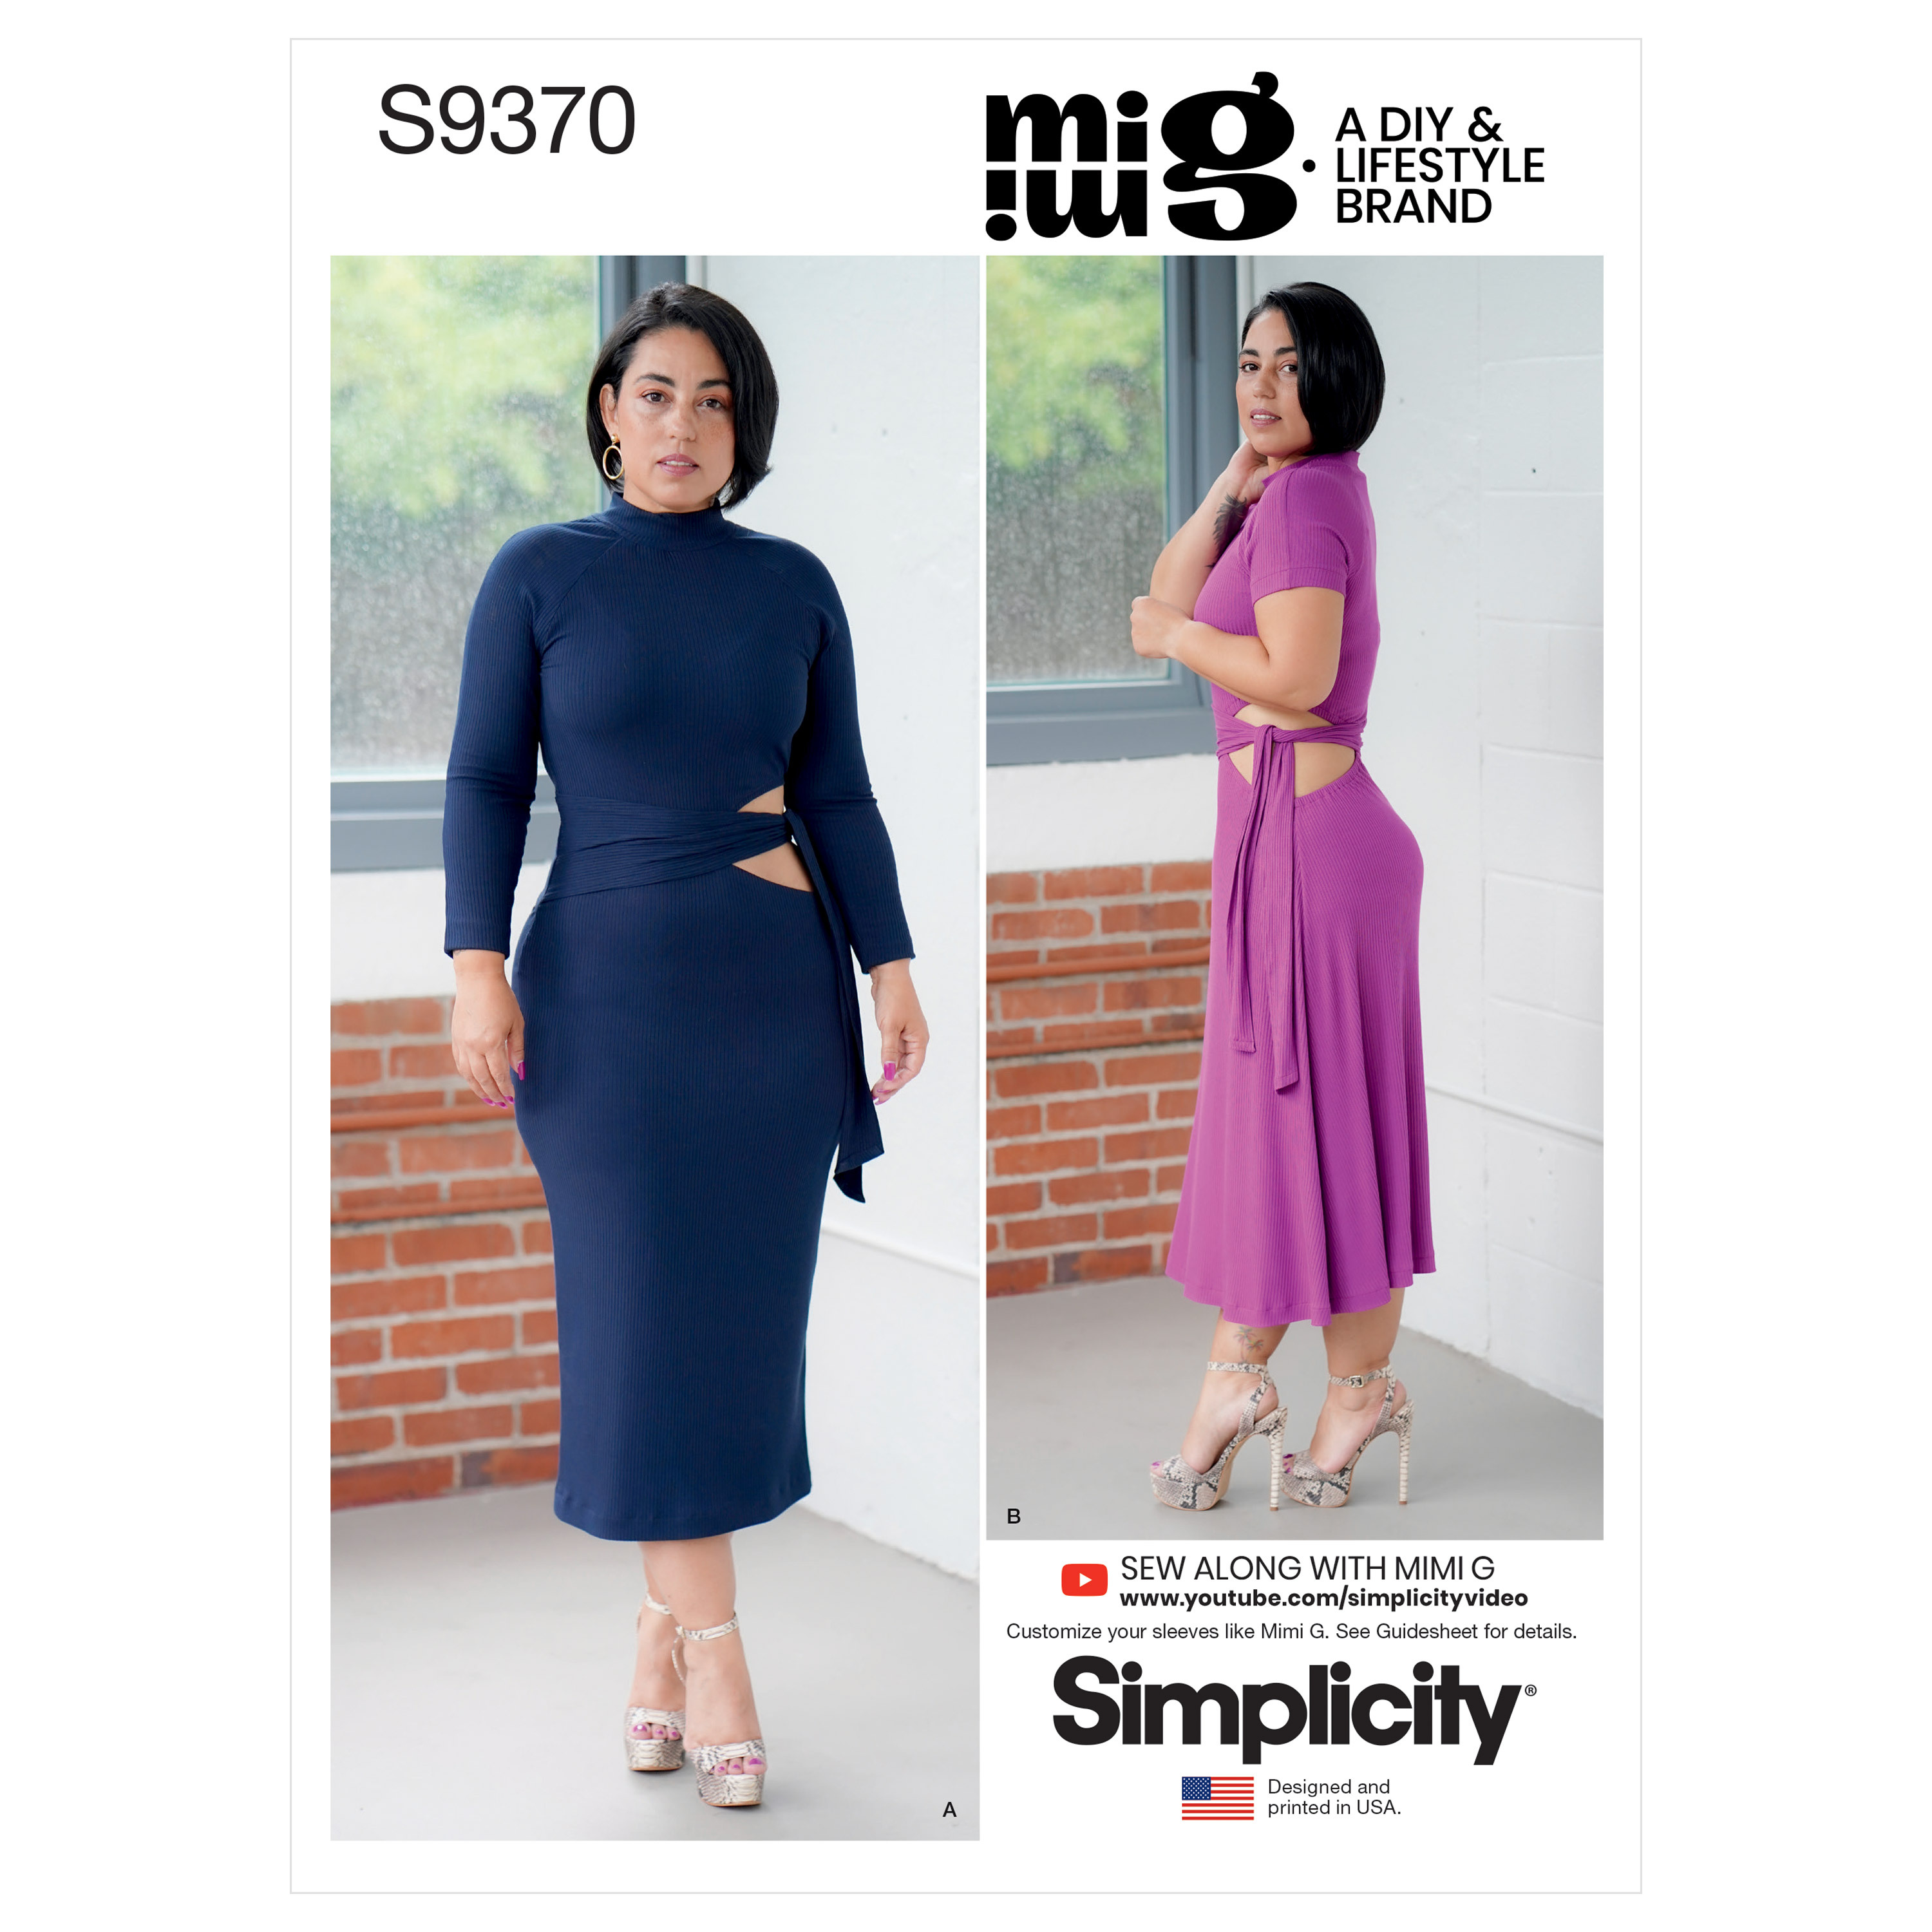 Mimi G. Style - Happy Tuesday! I posted a sew-along to this dress